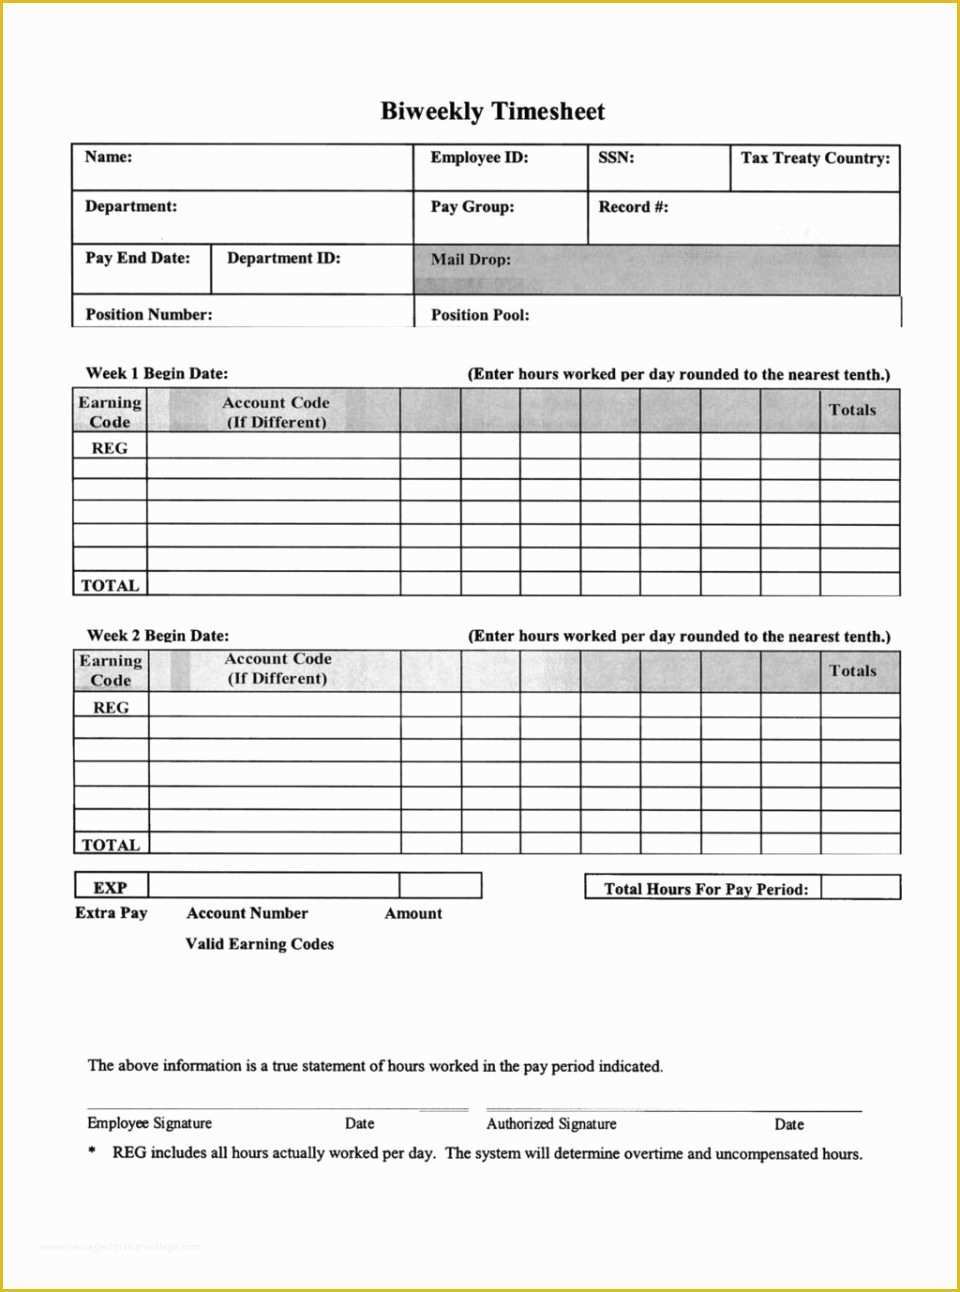 Free Billable Hours Timesheet Template Of Free Billable Hours Invoice Template Tracking Timesheet